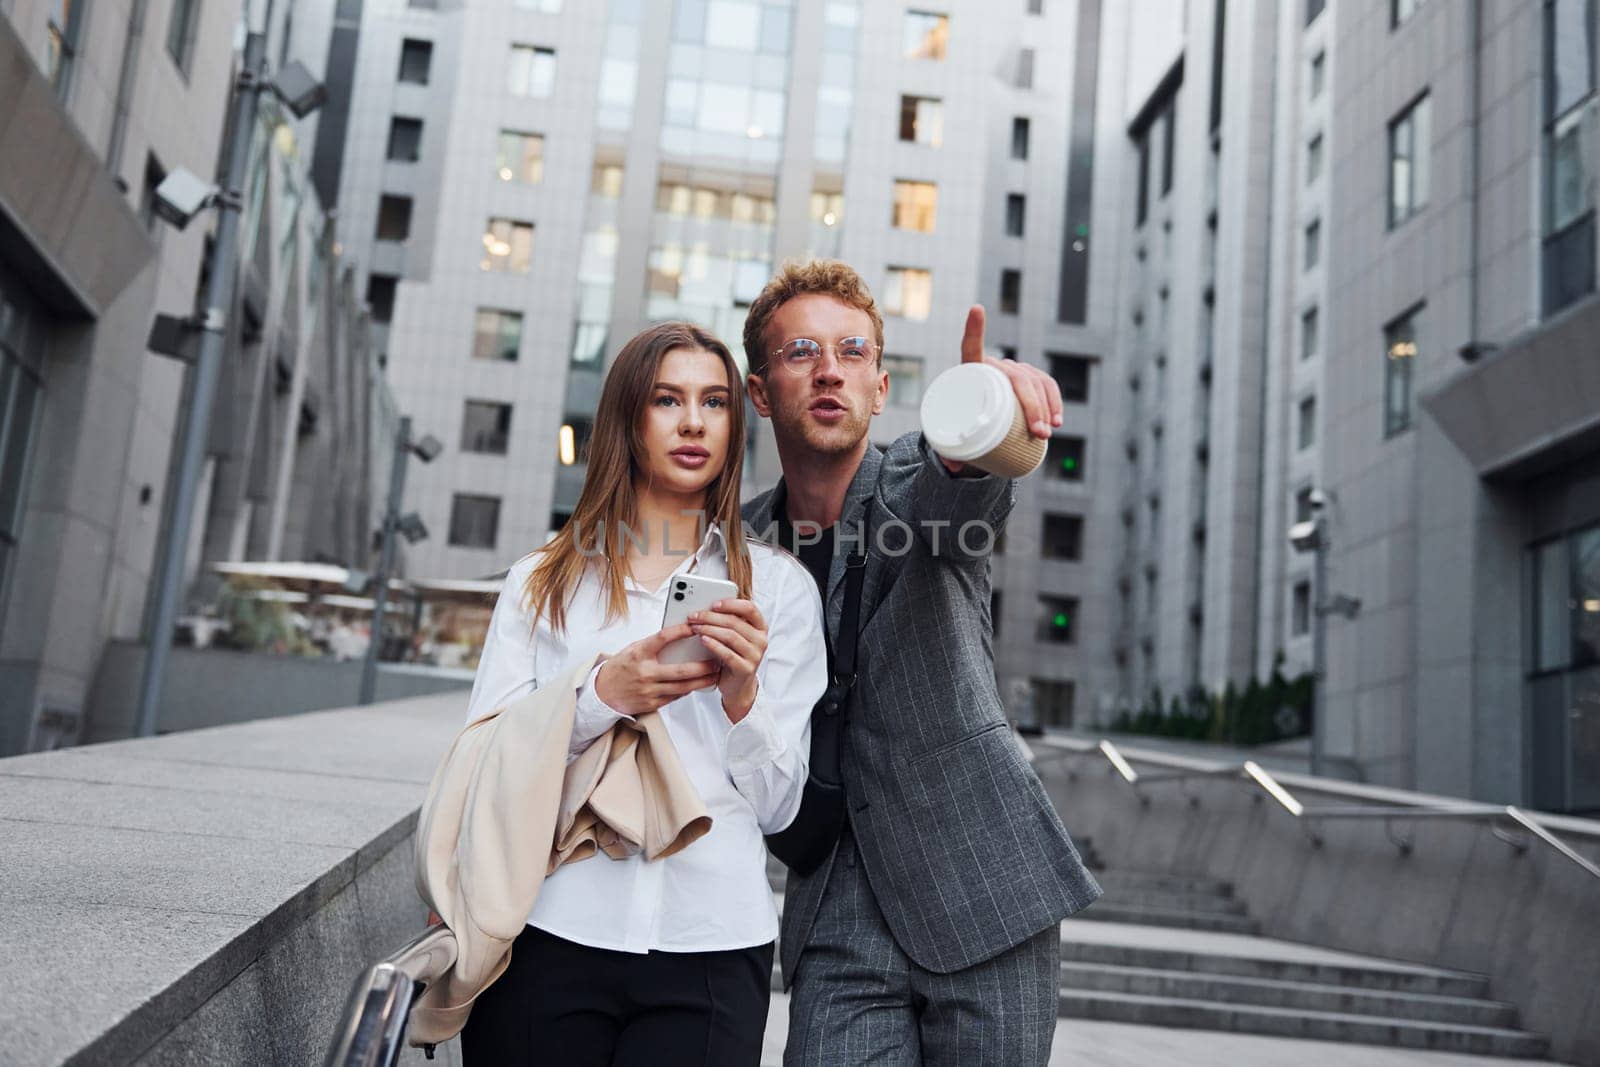 With phone and drink. Woman and man in the town at daytime. Well dressed people.